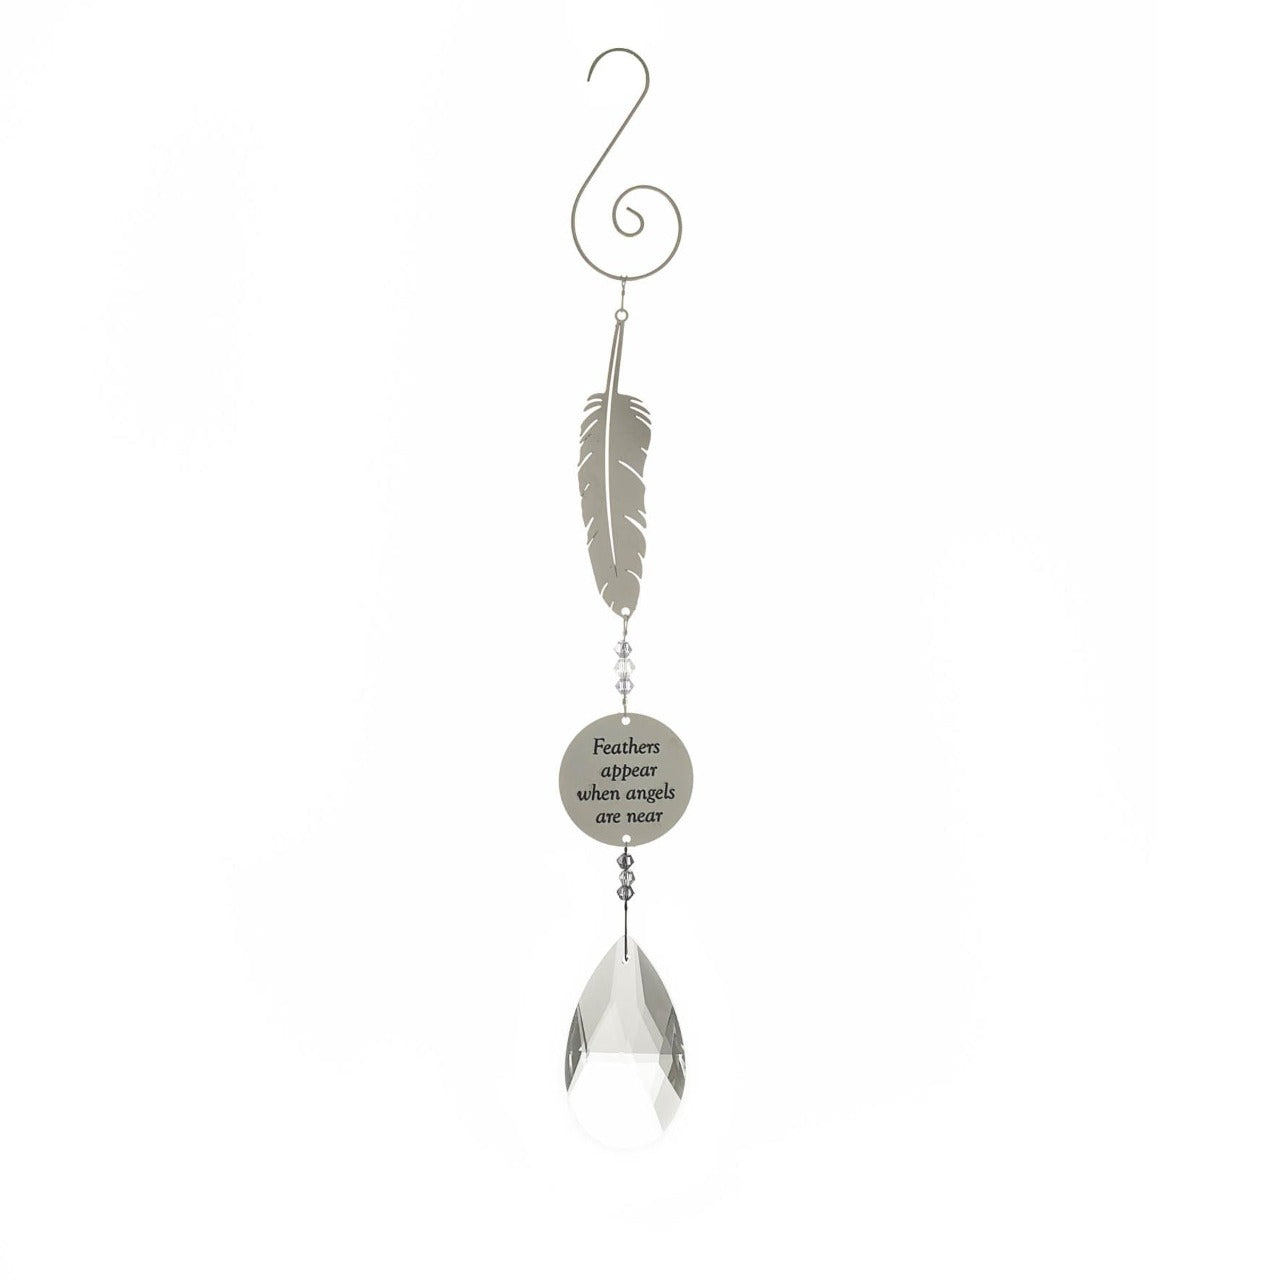 Thoughts of You Crystal Metal Hanger - Feather  A crystal metal hanger from Thoughts of You by CELEBRATIONS®.  This sparkling decoration is a thoughtful memorial gift which glistens in the sun to commemorate loved ones who have passed.